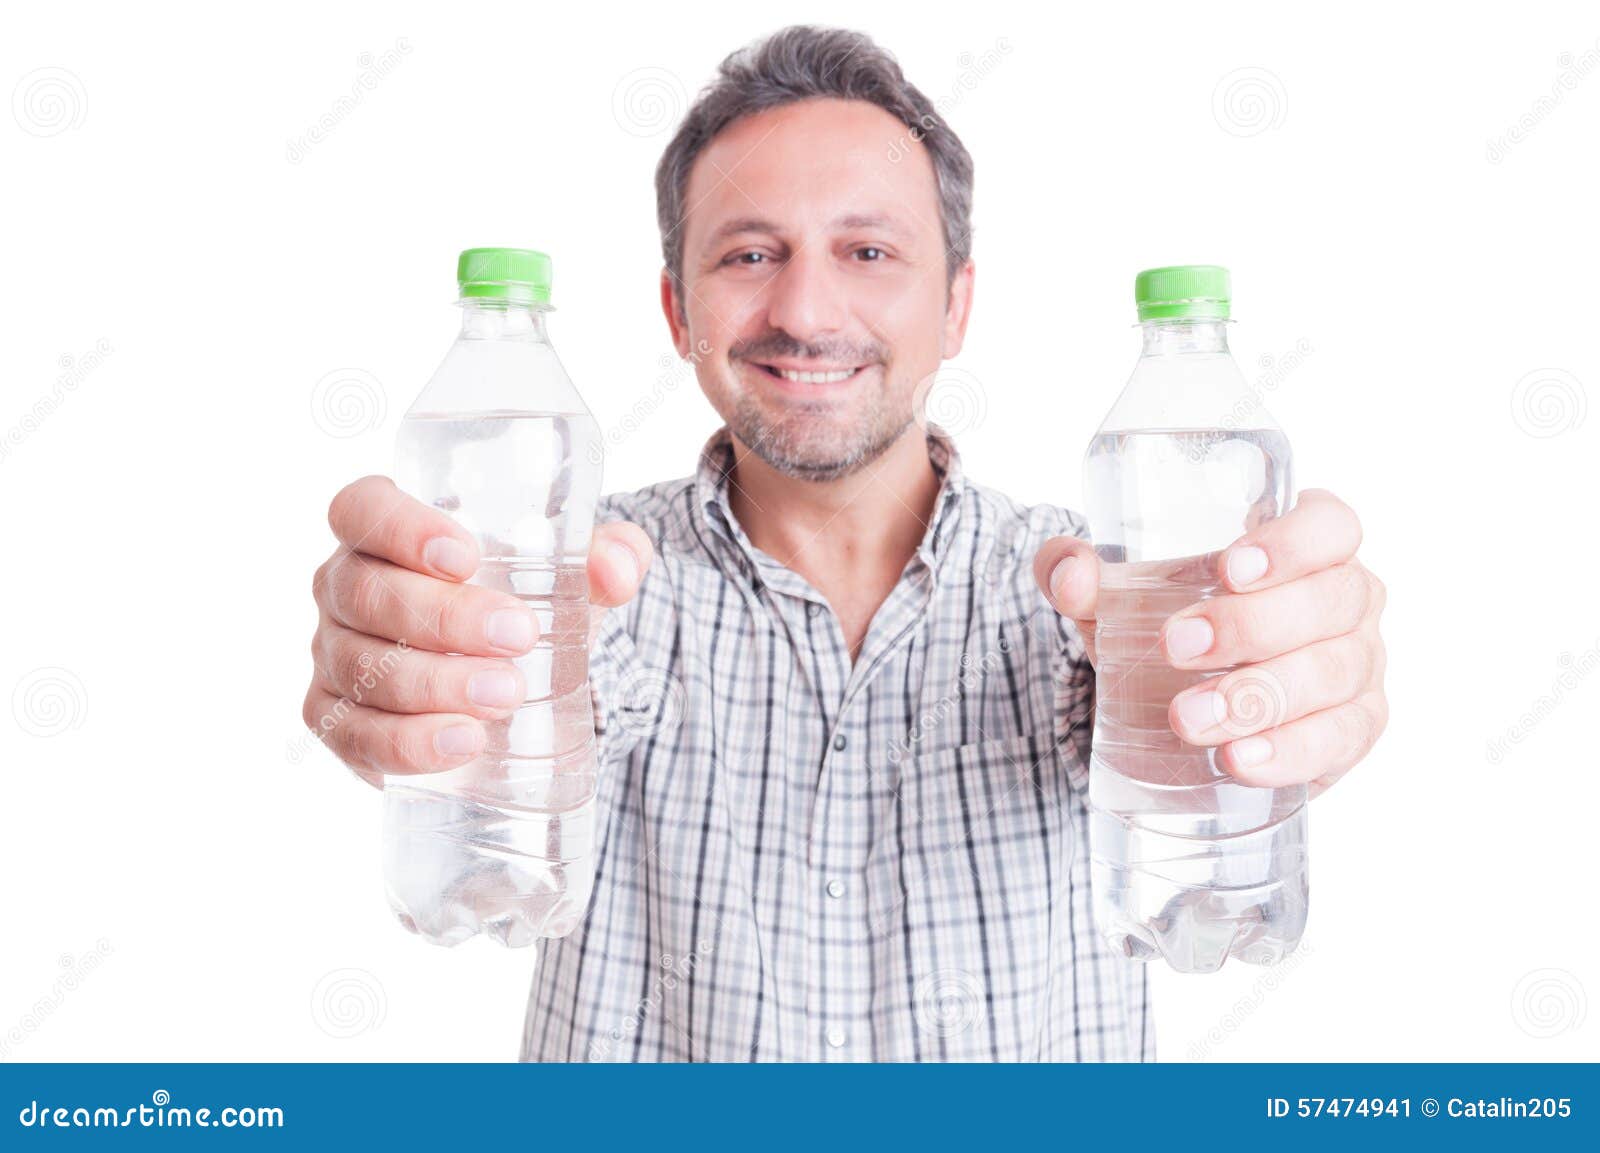 7,900+ Cold Water Bottle Stock Photos, Pictures & Royalty-Free